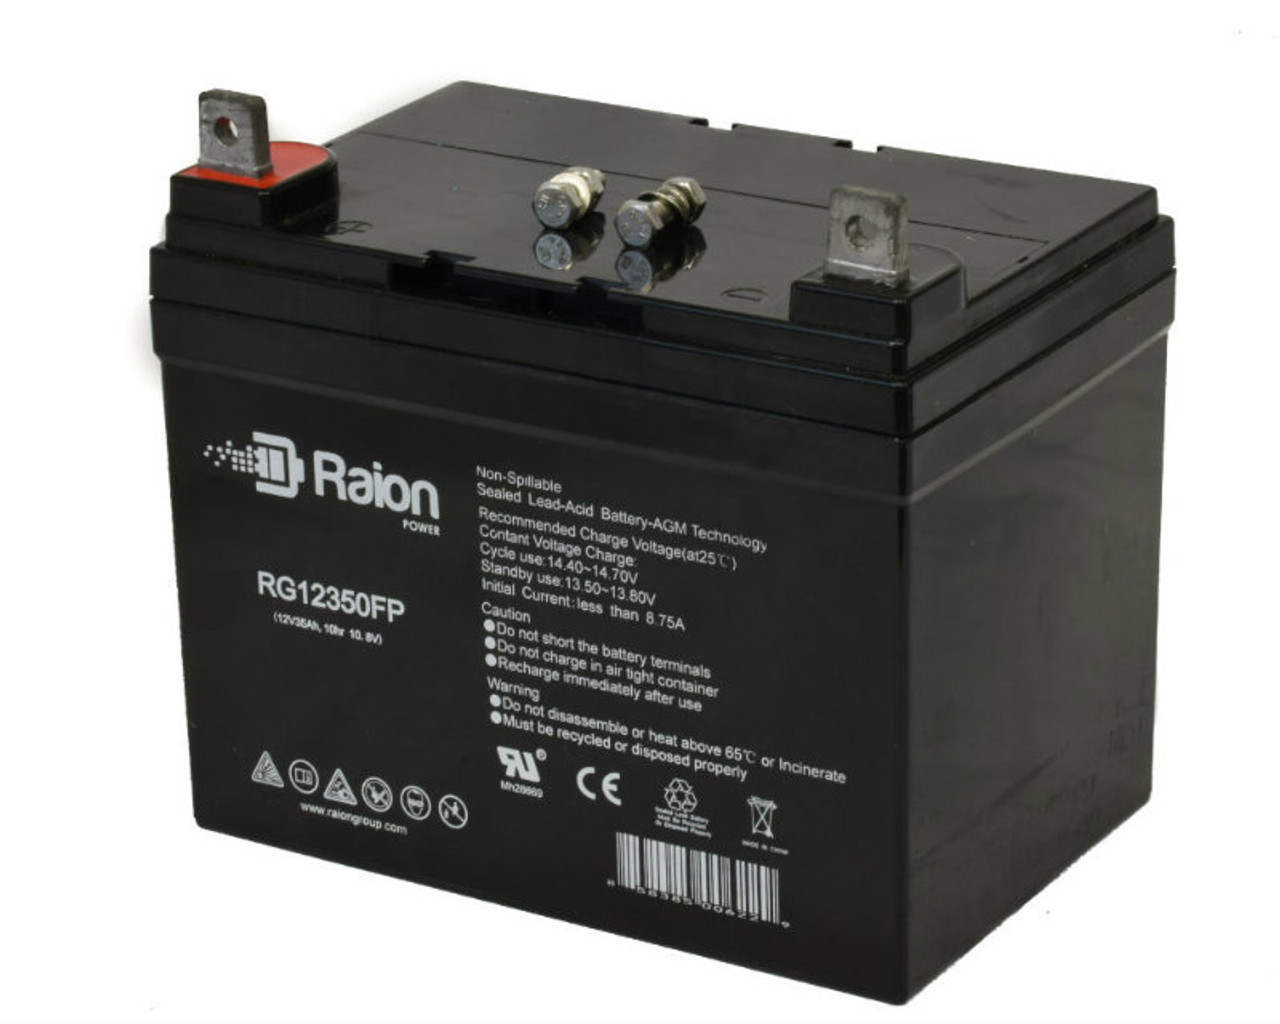 Raion Power Replacement 12V 35Ah RG12350FP Mobility Scooter Battery for Drive Medical Design Cirrus DP 116